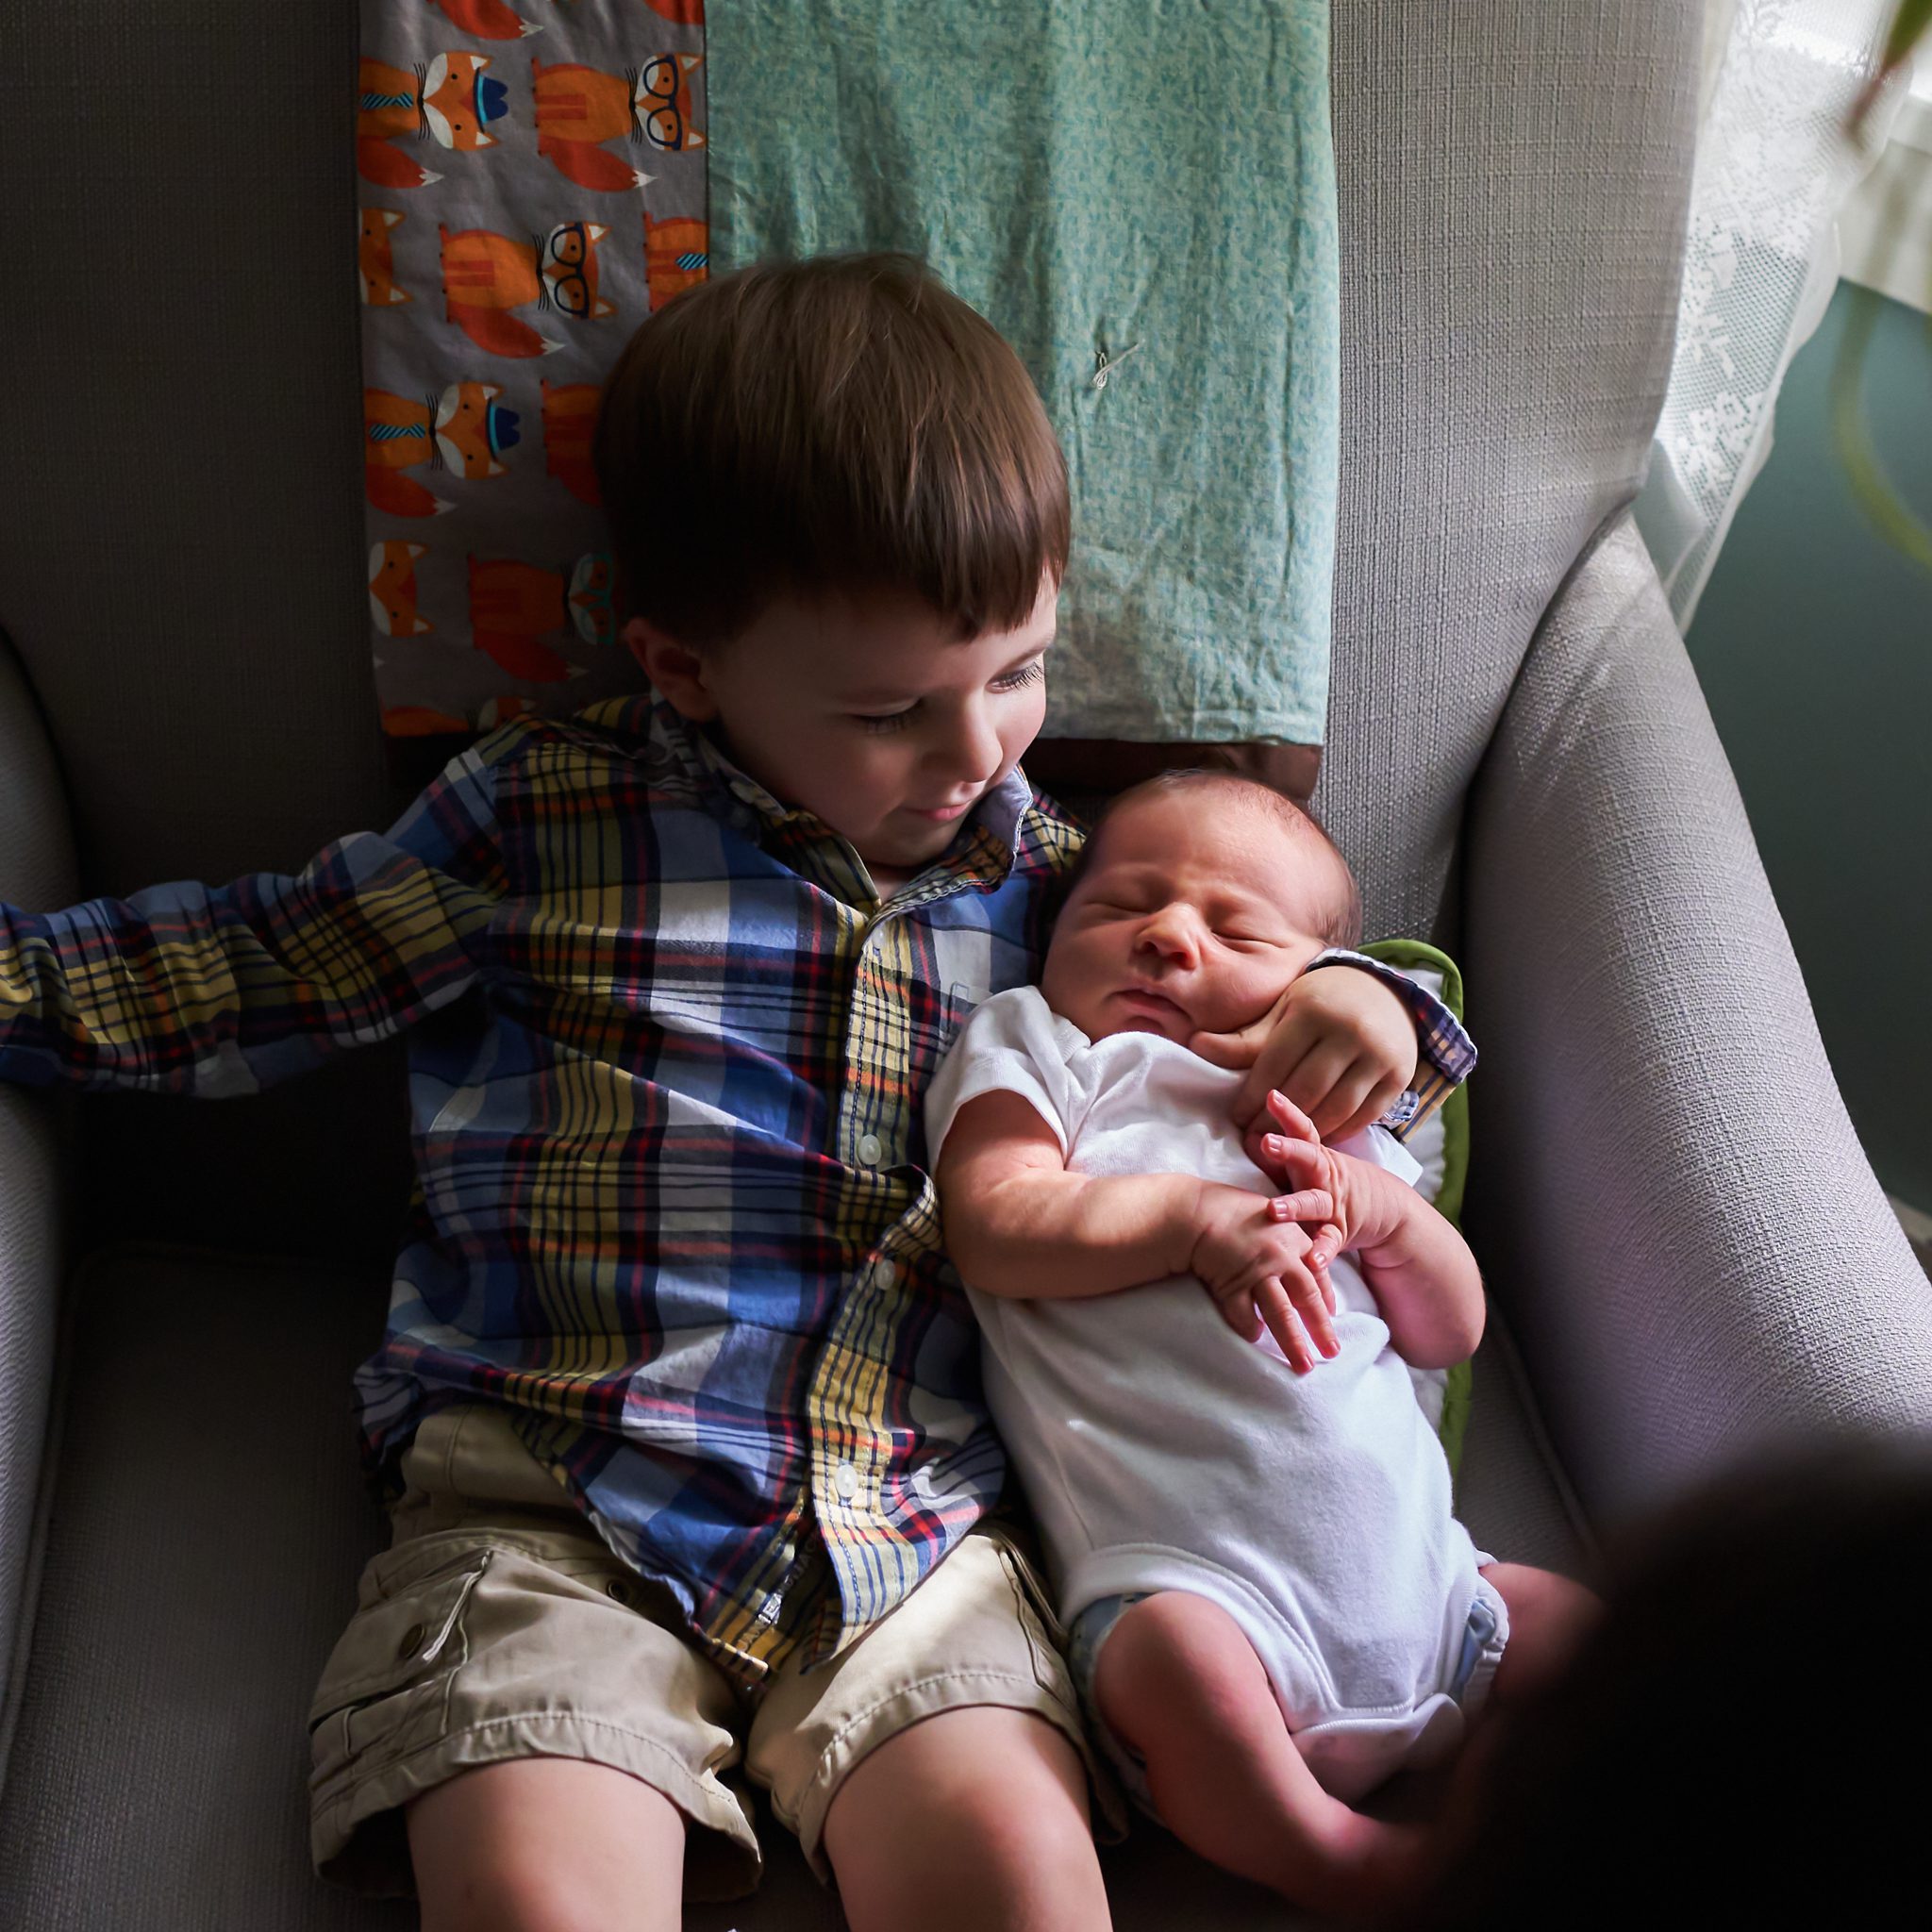 little boy holding newborn baby brother in chair by window inside home